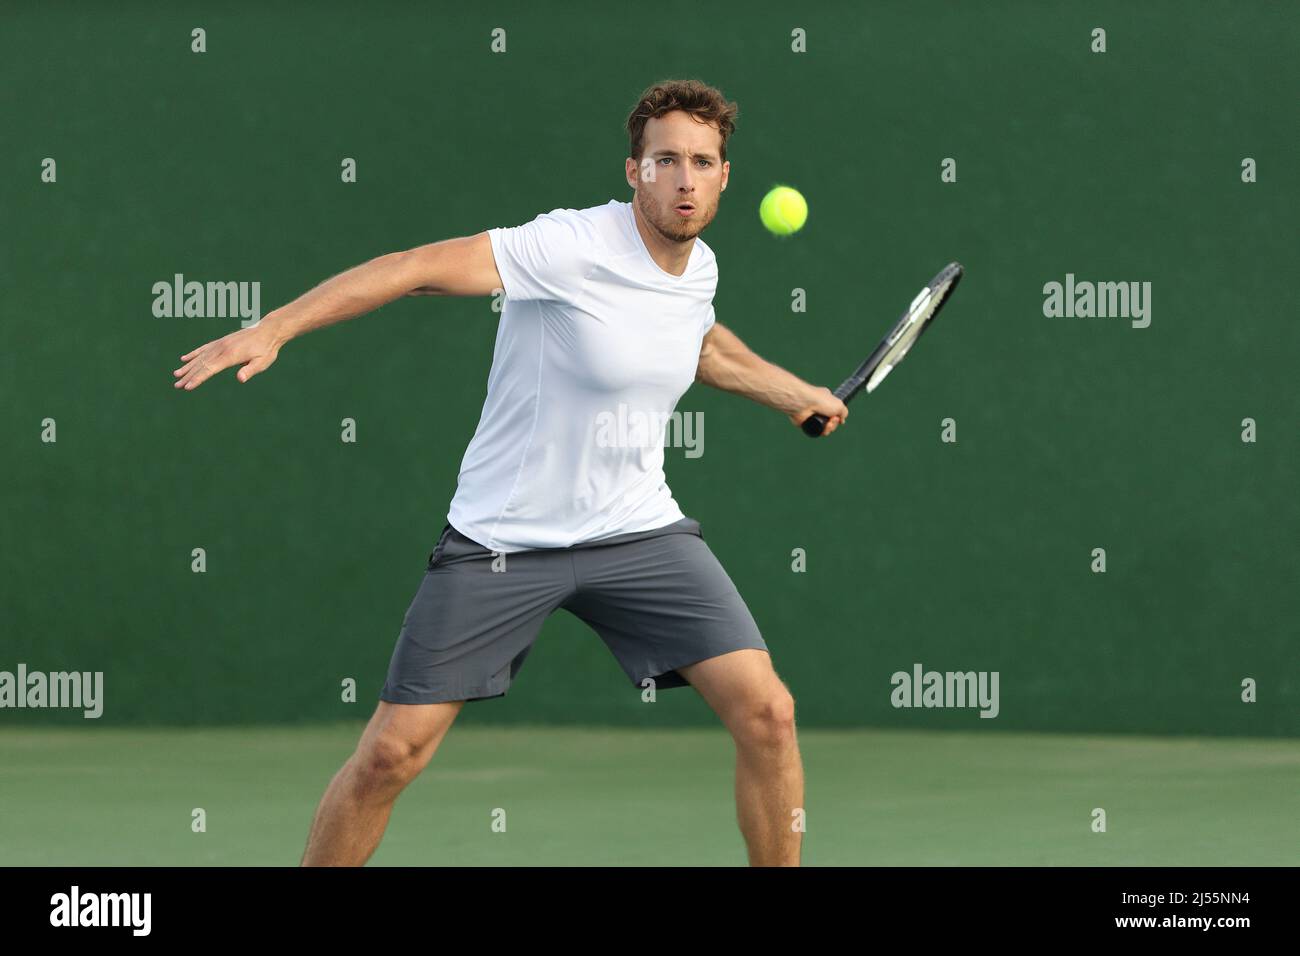 Tennis player man hitting ball with racket on green background. Sports athlete training forehand grip technique on outdoor court Stock Photo